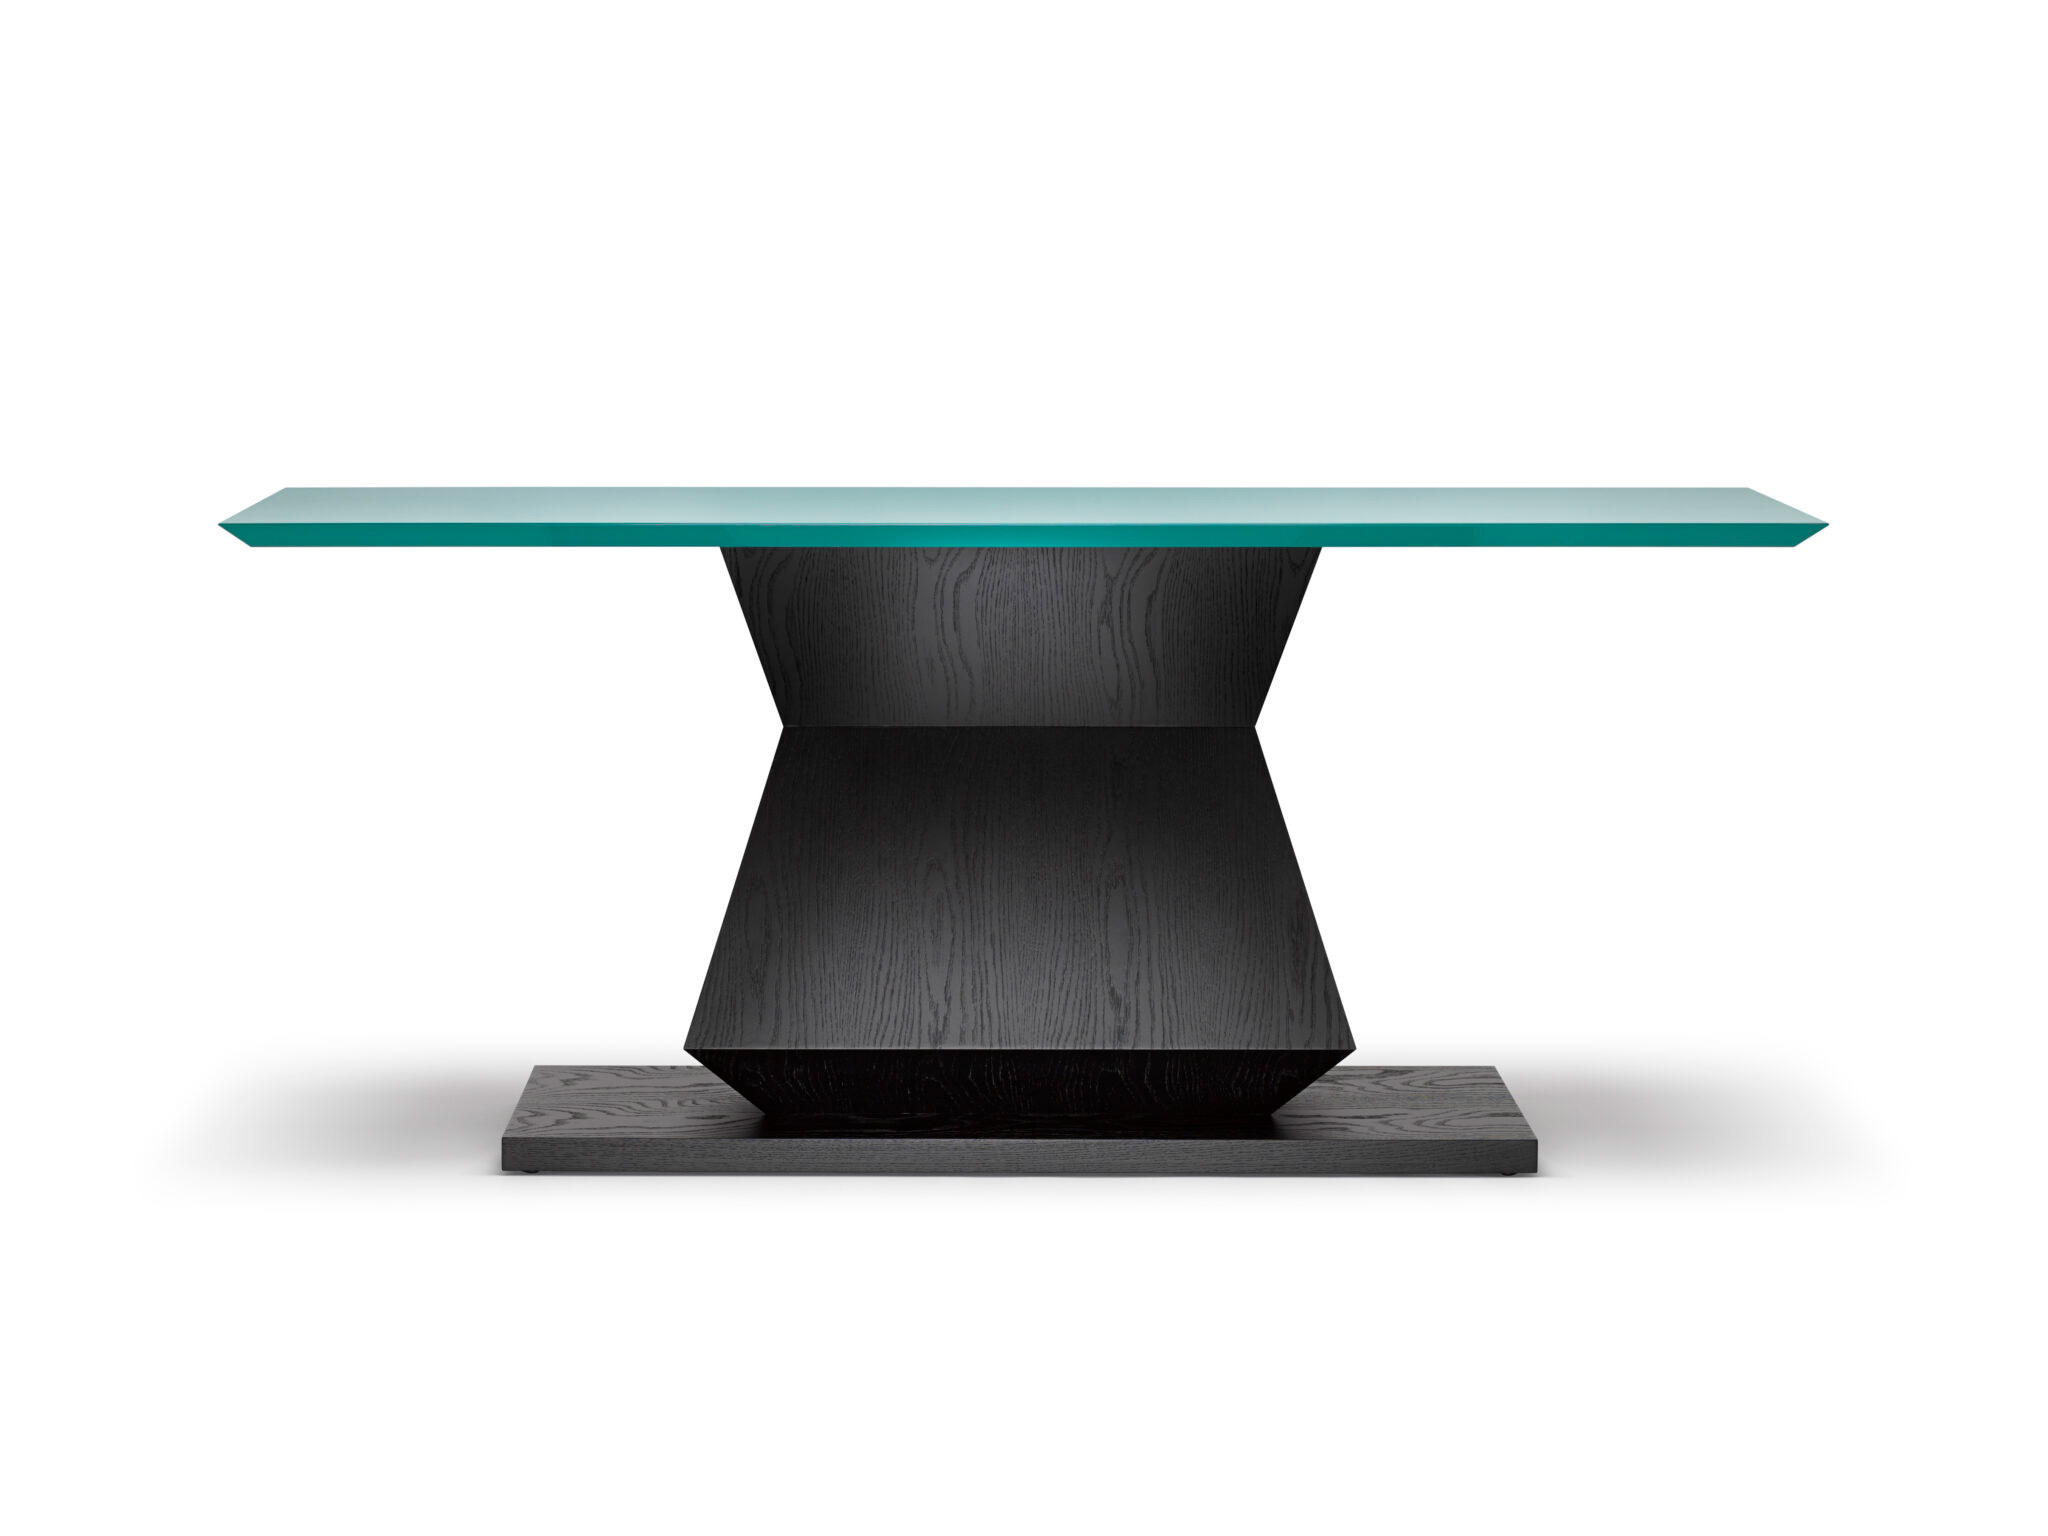 The Edo Condole Table - Shown here in ebonised oak with a turquoise lacquered top*.